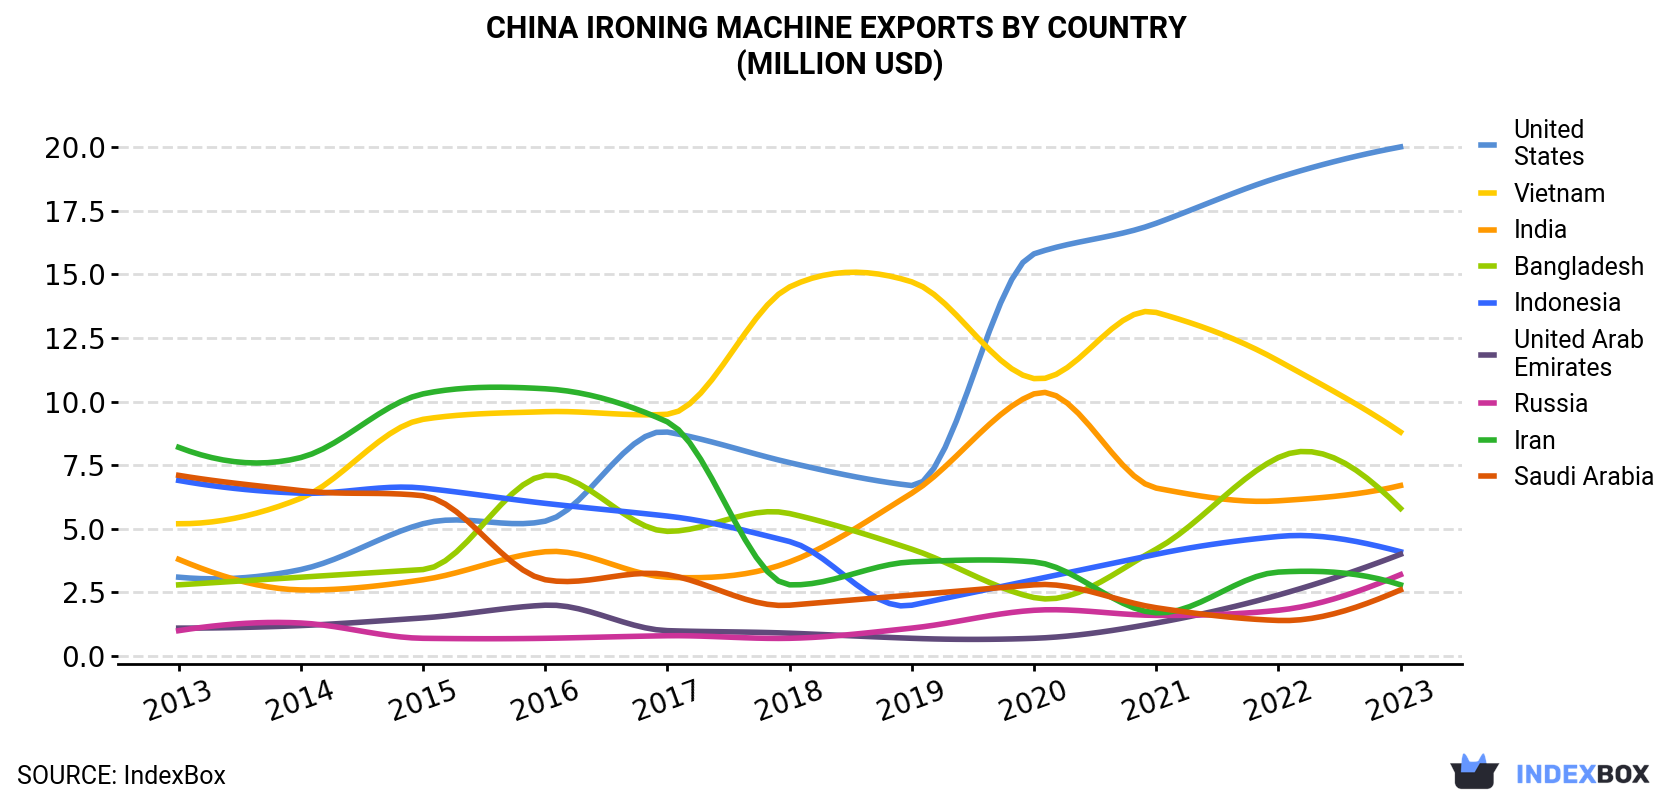 China Ironing Machine Exports By Country (Million USD)